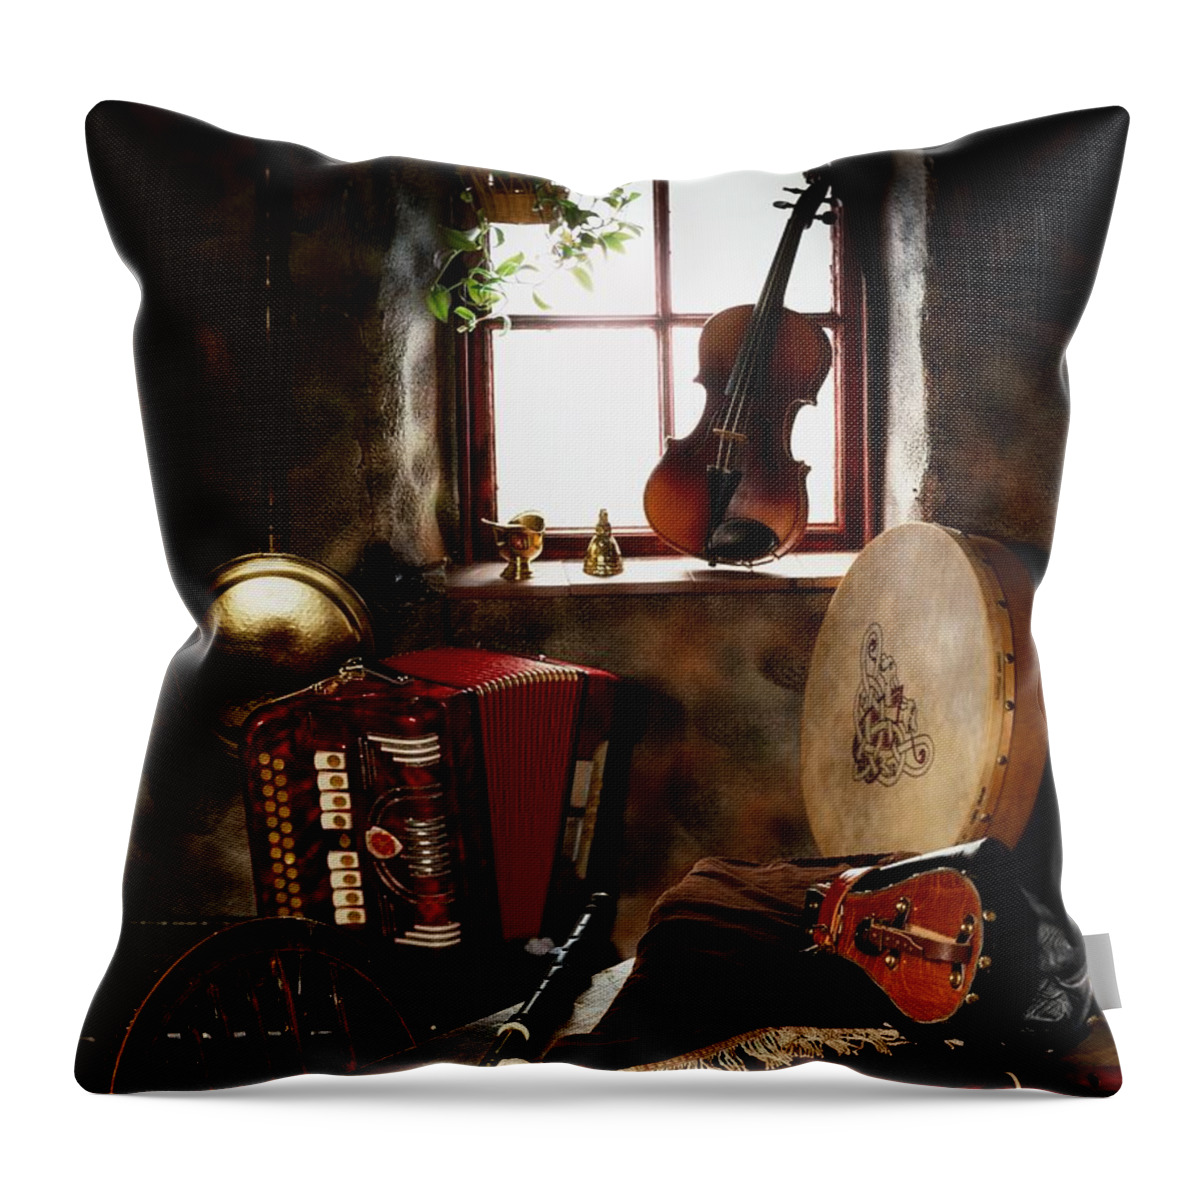 Bodhran Throw Pillow featuring the photograph Traditional Musical Instruments, In Old by The Irish Image Collection 